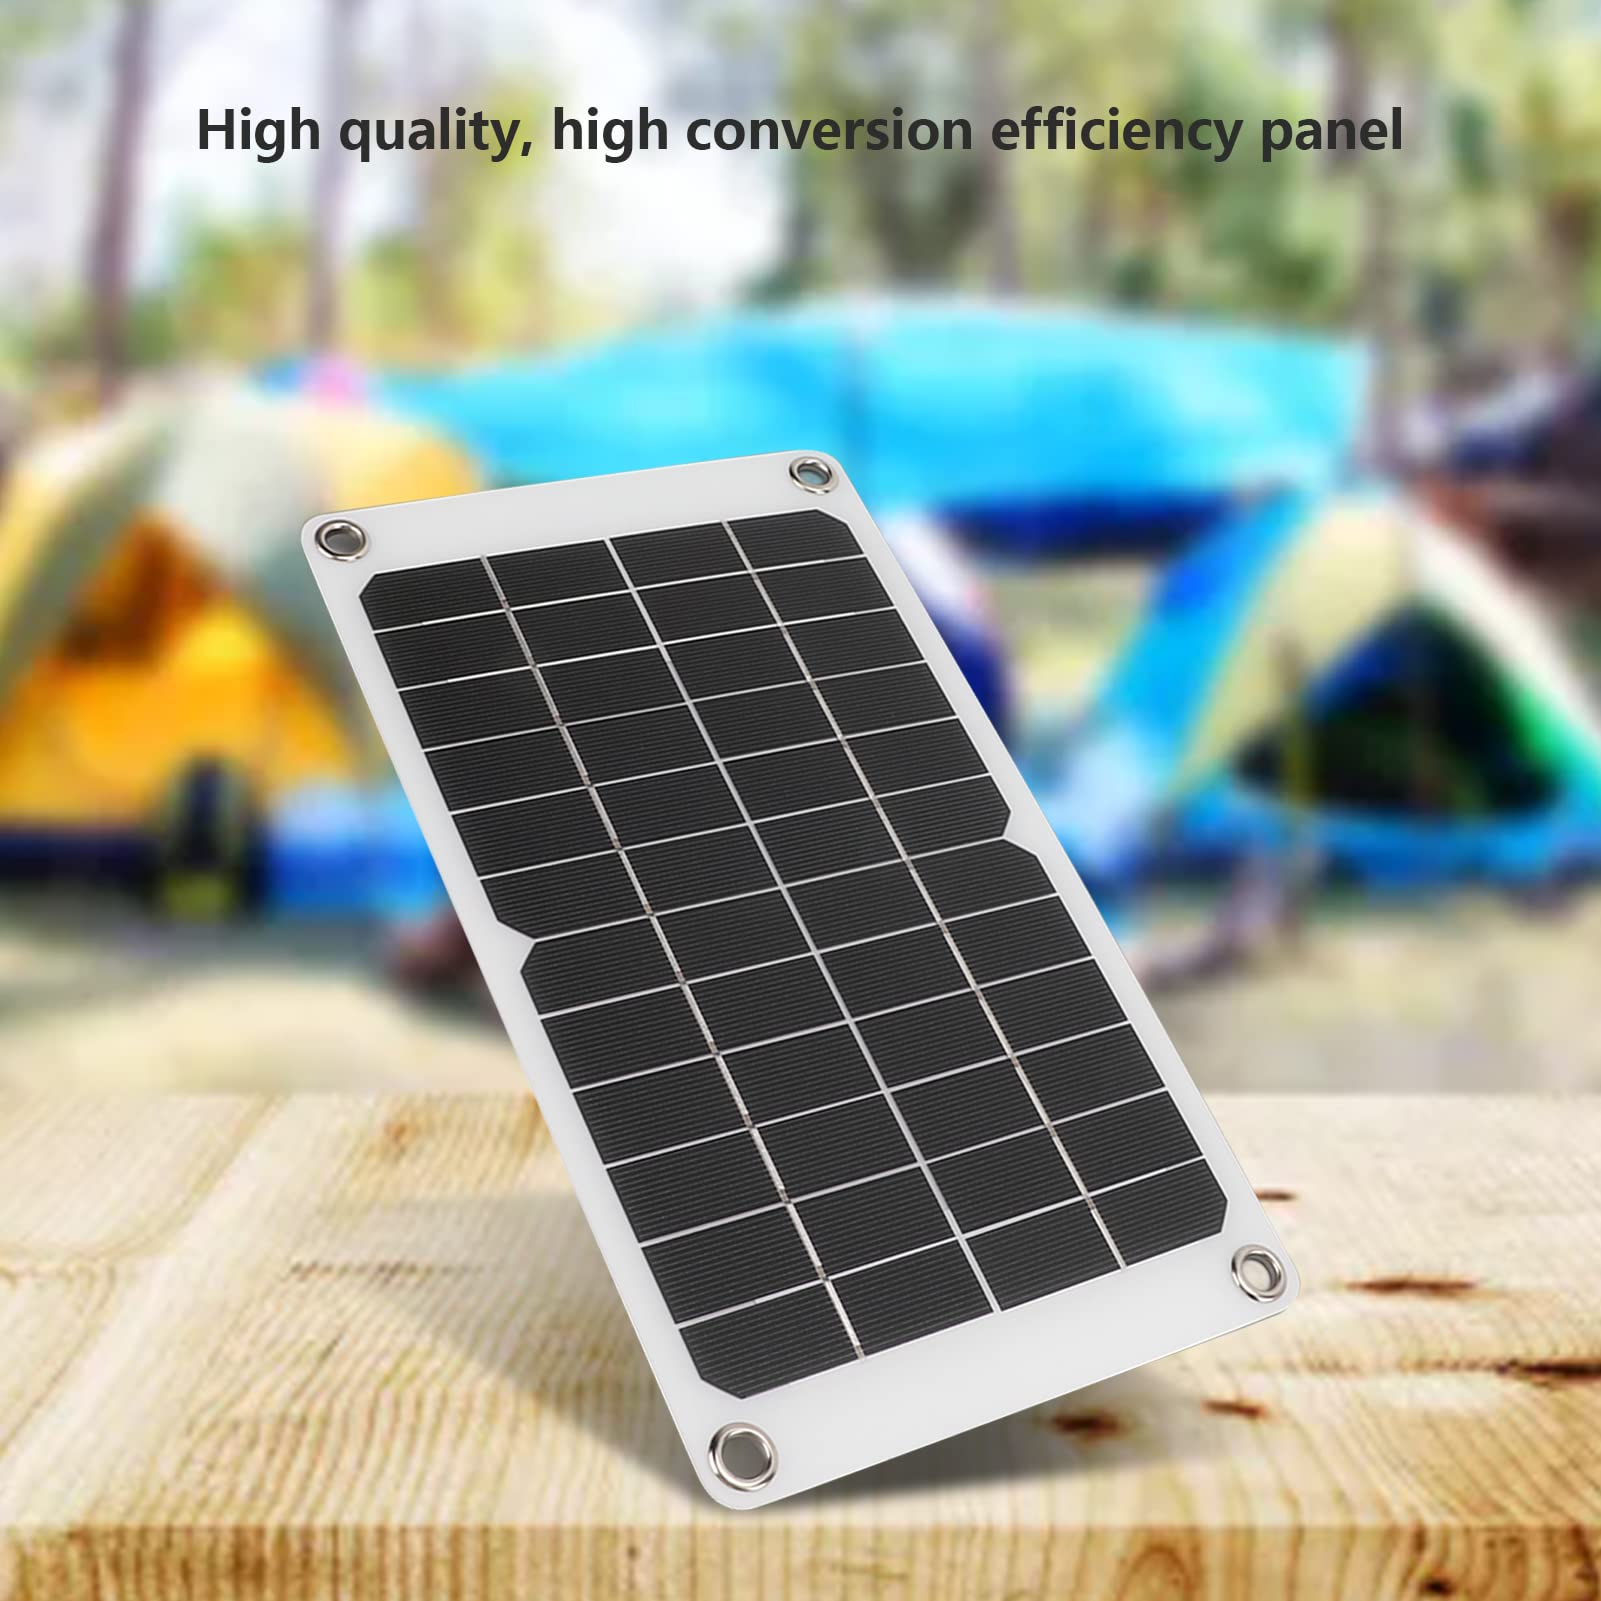 Solar Battery Charger, 12 Volt 7.8Watt Solar Trickle Charger, Waterproof Portable Power Solar Panel Battery Charger Maintainer for Car Automotive Boat Marine Motorcycle RV Trailer